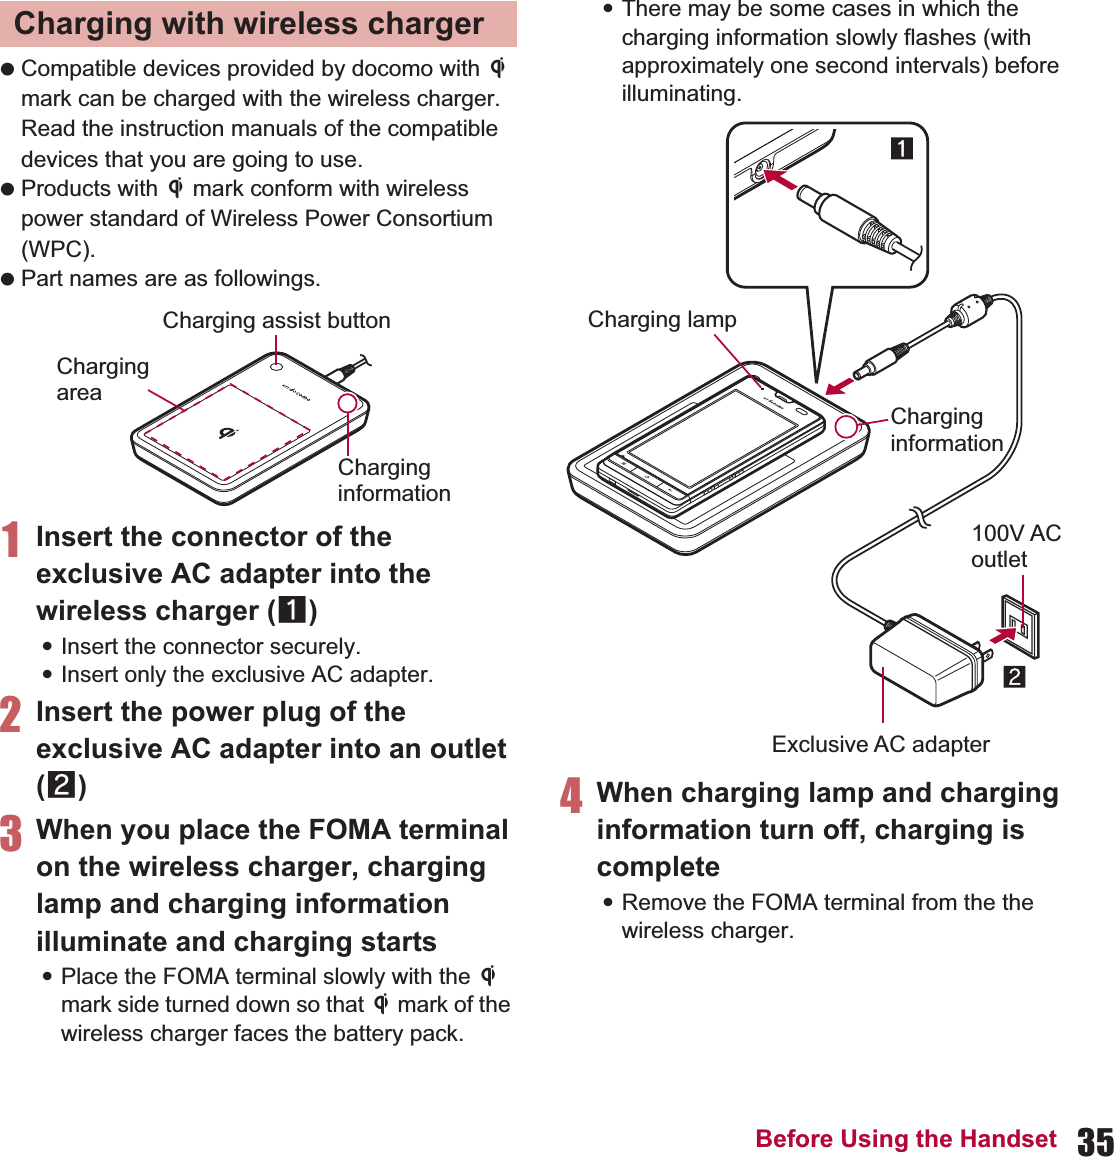 35Before Using the Handset Compatible devices provided by docomo with b mark can be charged with the wireless charger. Read the instruction manuals of the compatible devices that you are going to use. Products with b mark conform with wireless power standard of Wireless Power Consortium (WPC). Part names are as followings.1Insert the connector of the exclusive AC adapter into the wireless charger (1):Insert the connector securely.:Insert only the exclusive AC adapter.2Insert the power plug of the exclusive AC adapter into an outlet (2)3When you place the FOMA terminal on the wireless charger, charging lamp and charging information illuminate and charging starts:Place the FOMA terminal slowly with the b mark side turned down so that b mark of the wireless charger faces the battery pack.:There may be some cases in which the charging information slowly flashes (with approximately one second intervals) before illuminating.4When charging lamp and charging information turn off, charging is complete:Remove the FOMA terminal from the the wireless charger.Charging with wireless chargerCharginginformationChargingareaCharging assist buttonExclusive AC adapterCharging informationCharging lamp100V AC outlet